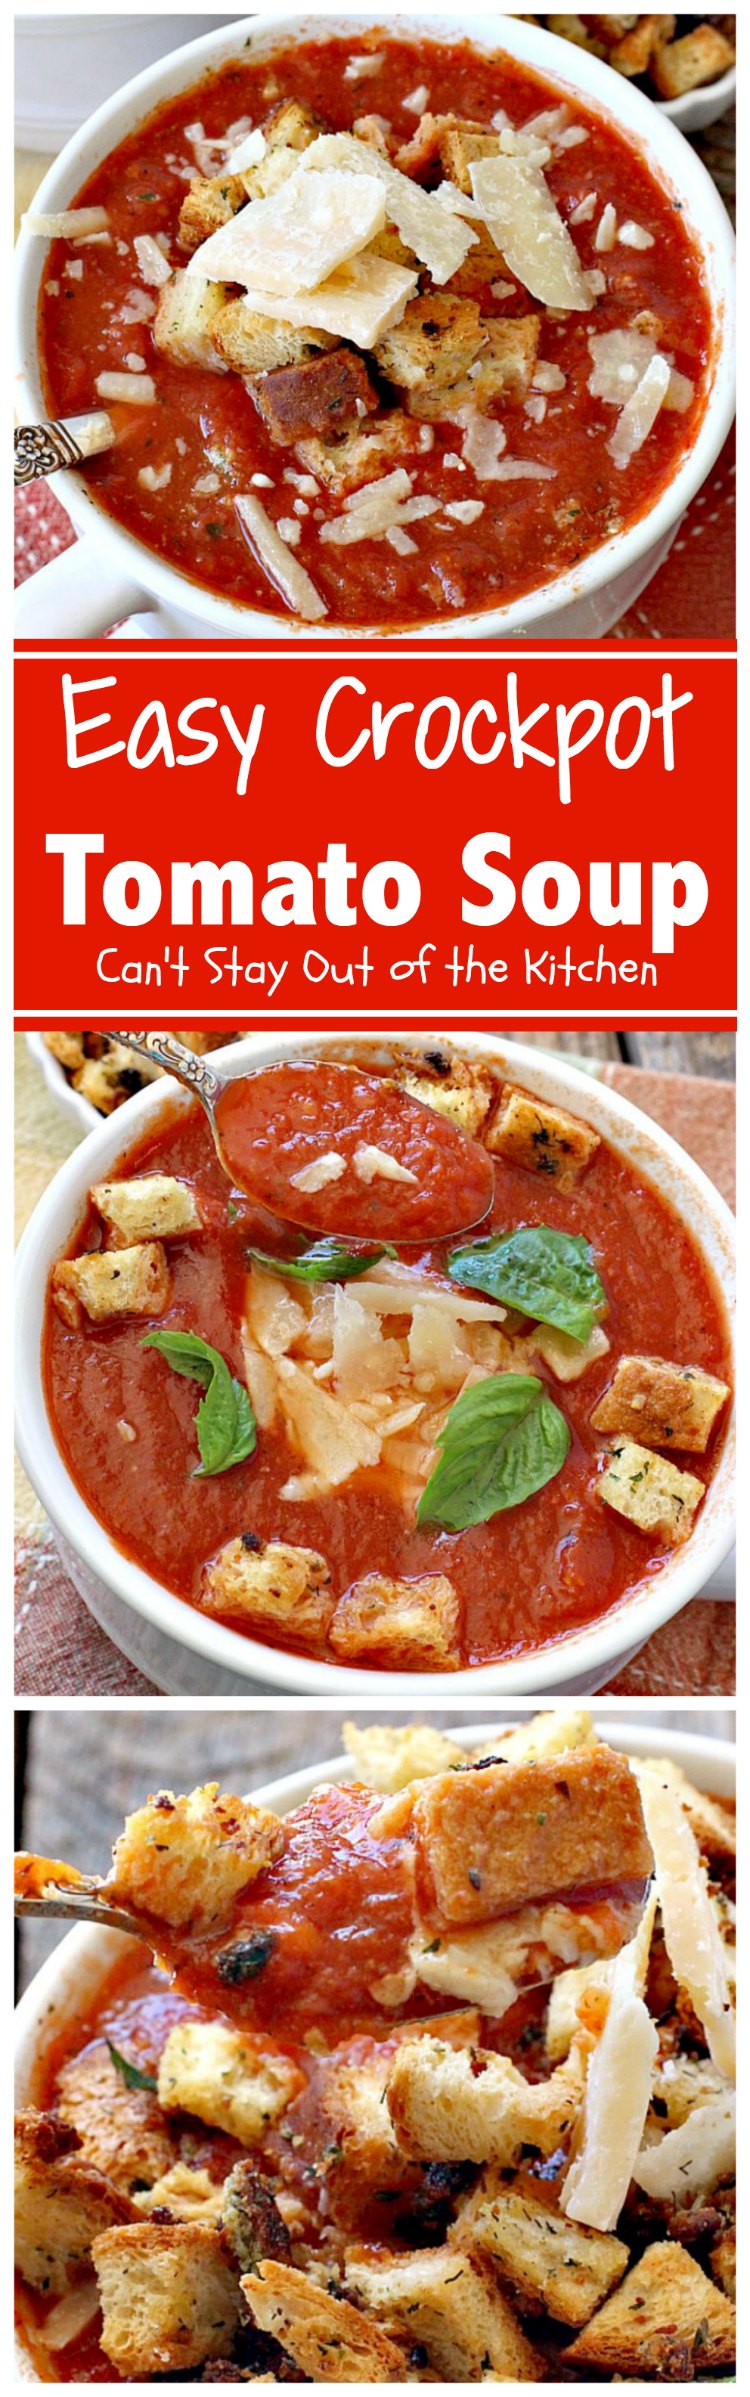 Easy Crockpot Tomato Soup | Can't Stay Out of the Kitchen | this delicious homemade #tomato #soup is amazing comfort food. It's so easy since it's made in the #slowcooker. #glutenfree & #vegan if you eliminate the #parmesancheese as a garnish.